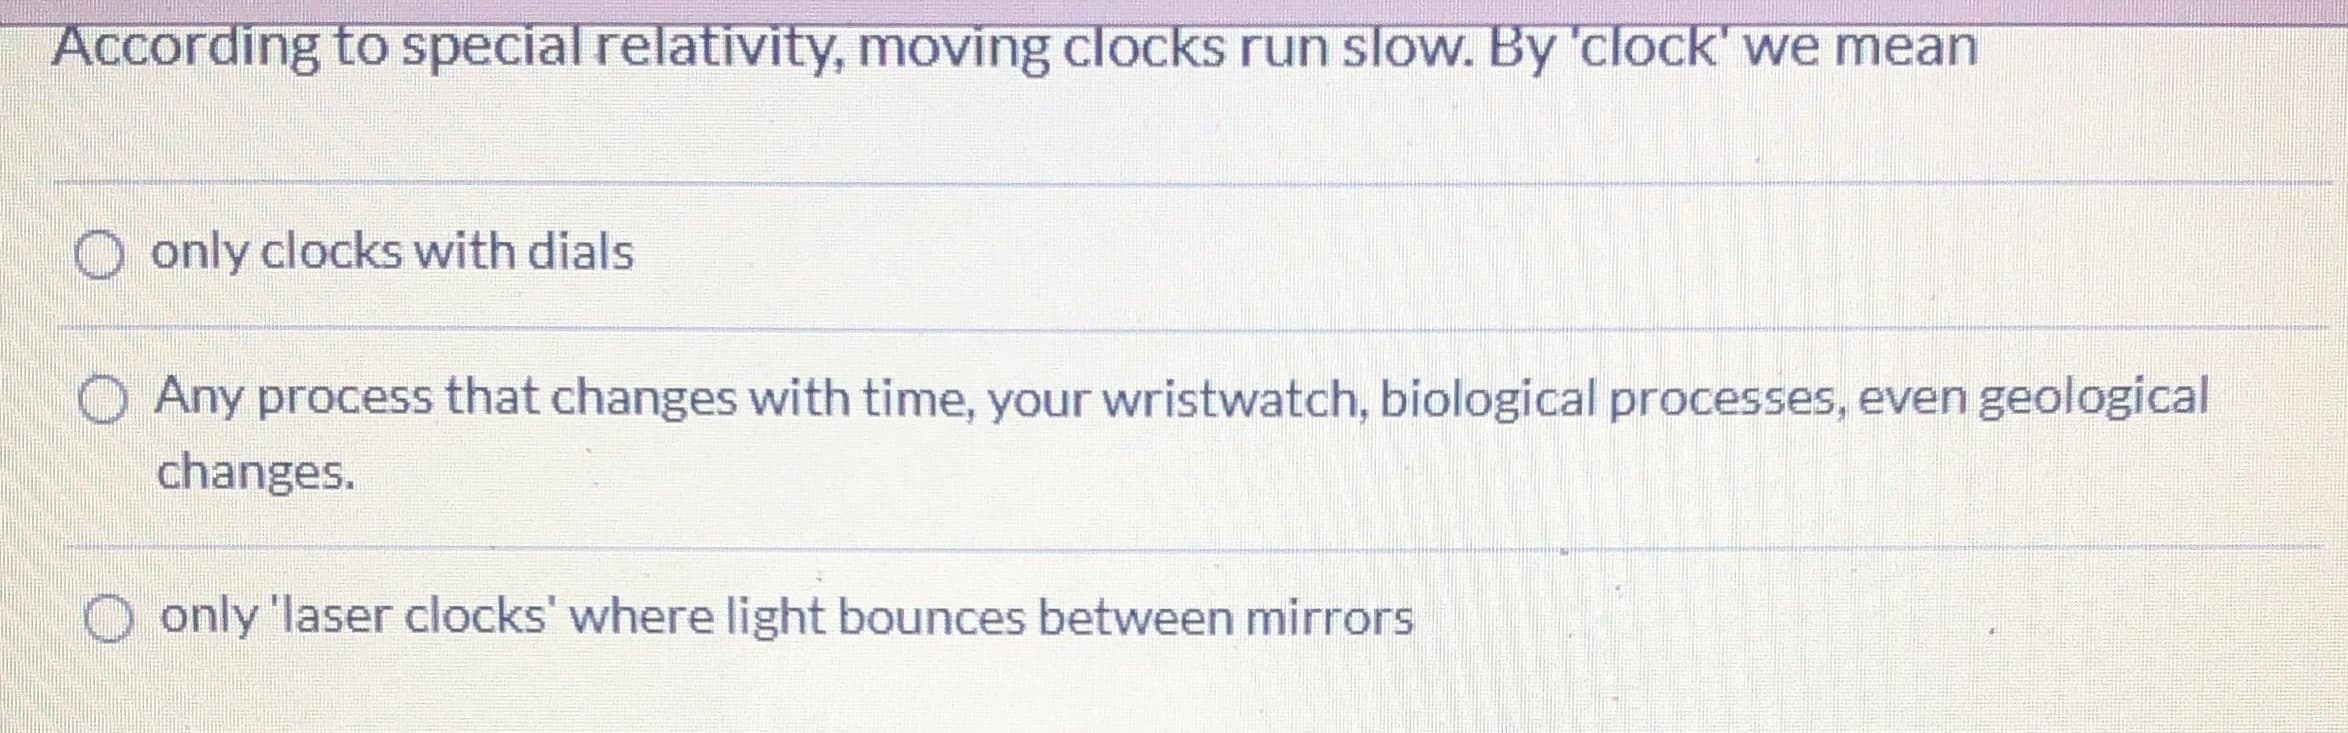 According to special relativity, moving clocks run slow. By 'clock' we mean
O only clocks with dials
O Any process that changes with time, your wristwatch, biological processes, even geological
changes.
only 'laser clocks' where light bounces between mirrors
